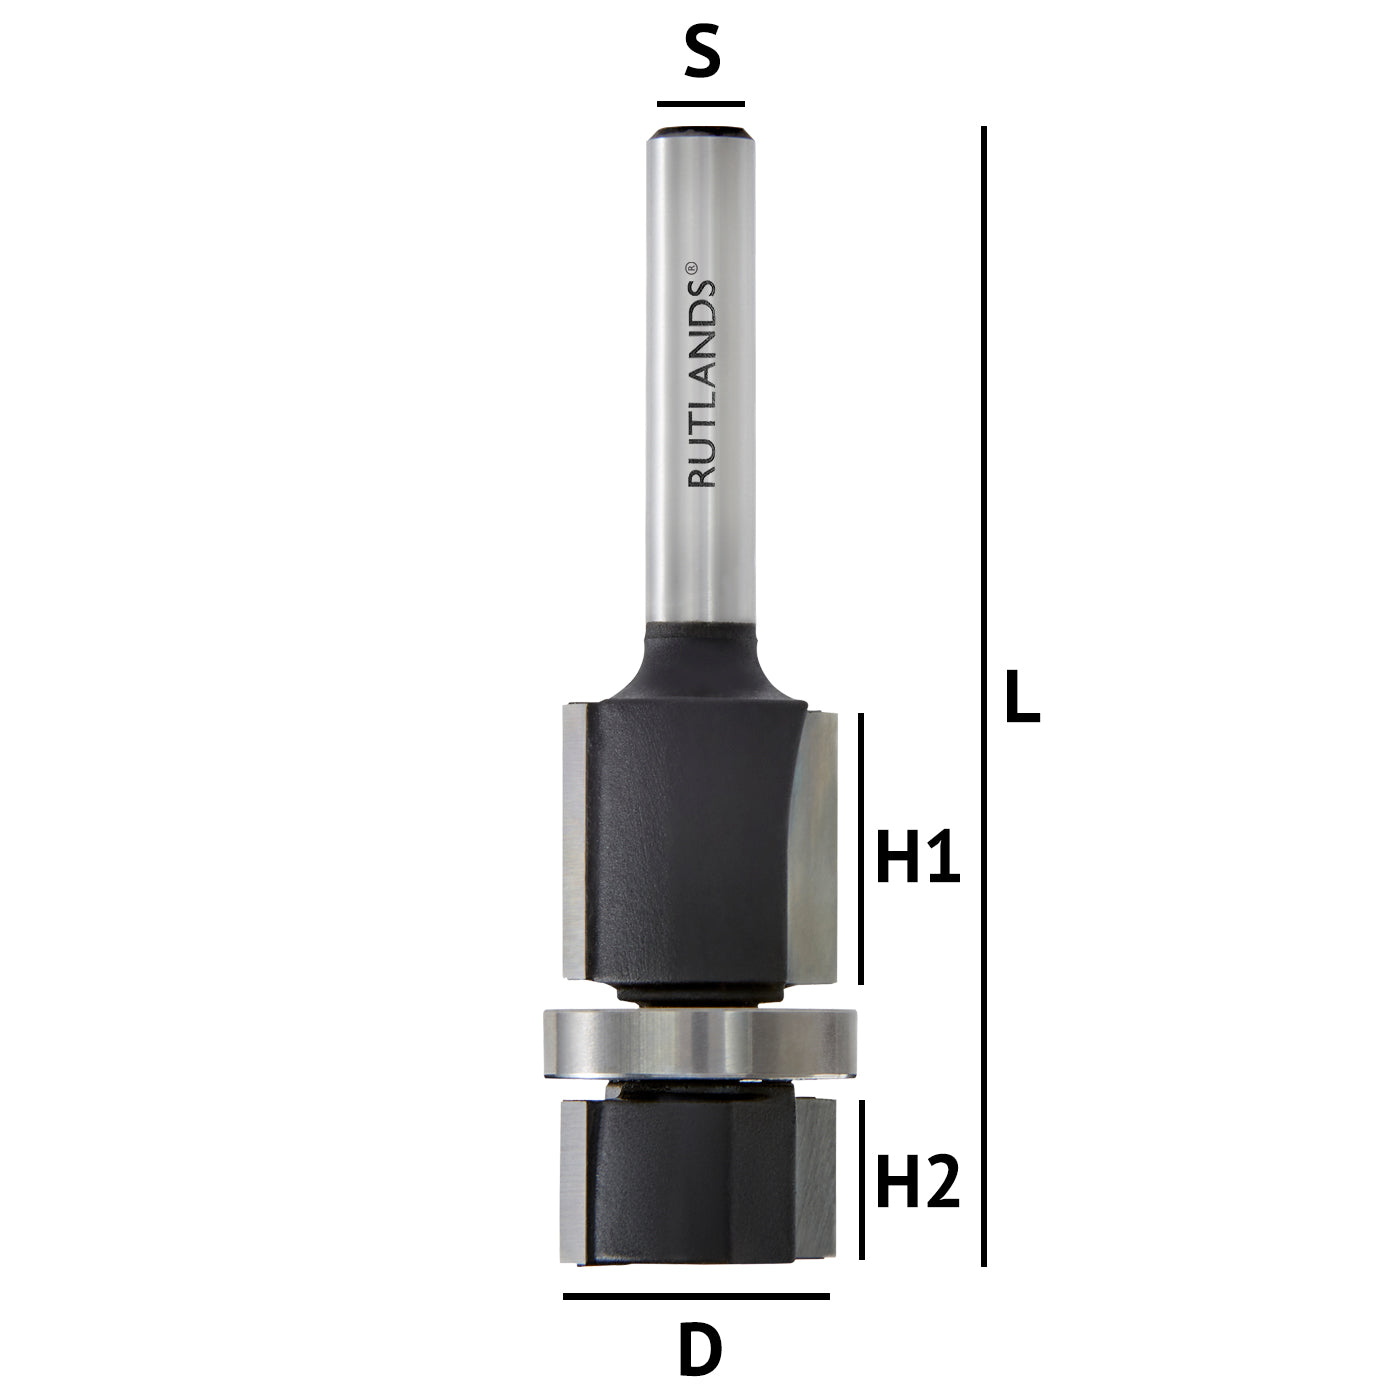 Router Bit - Flush Trim with Central Bearing - D=18mm H1=15mm H2=9mm L=64.2mm S=1/4"